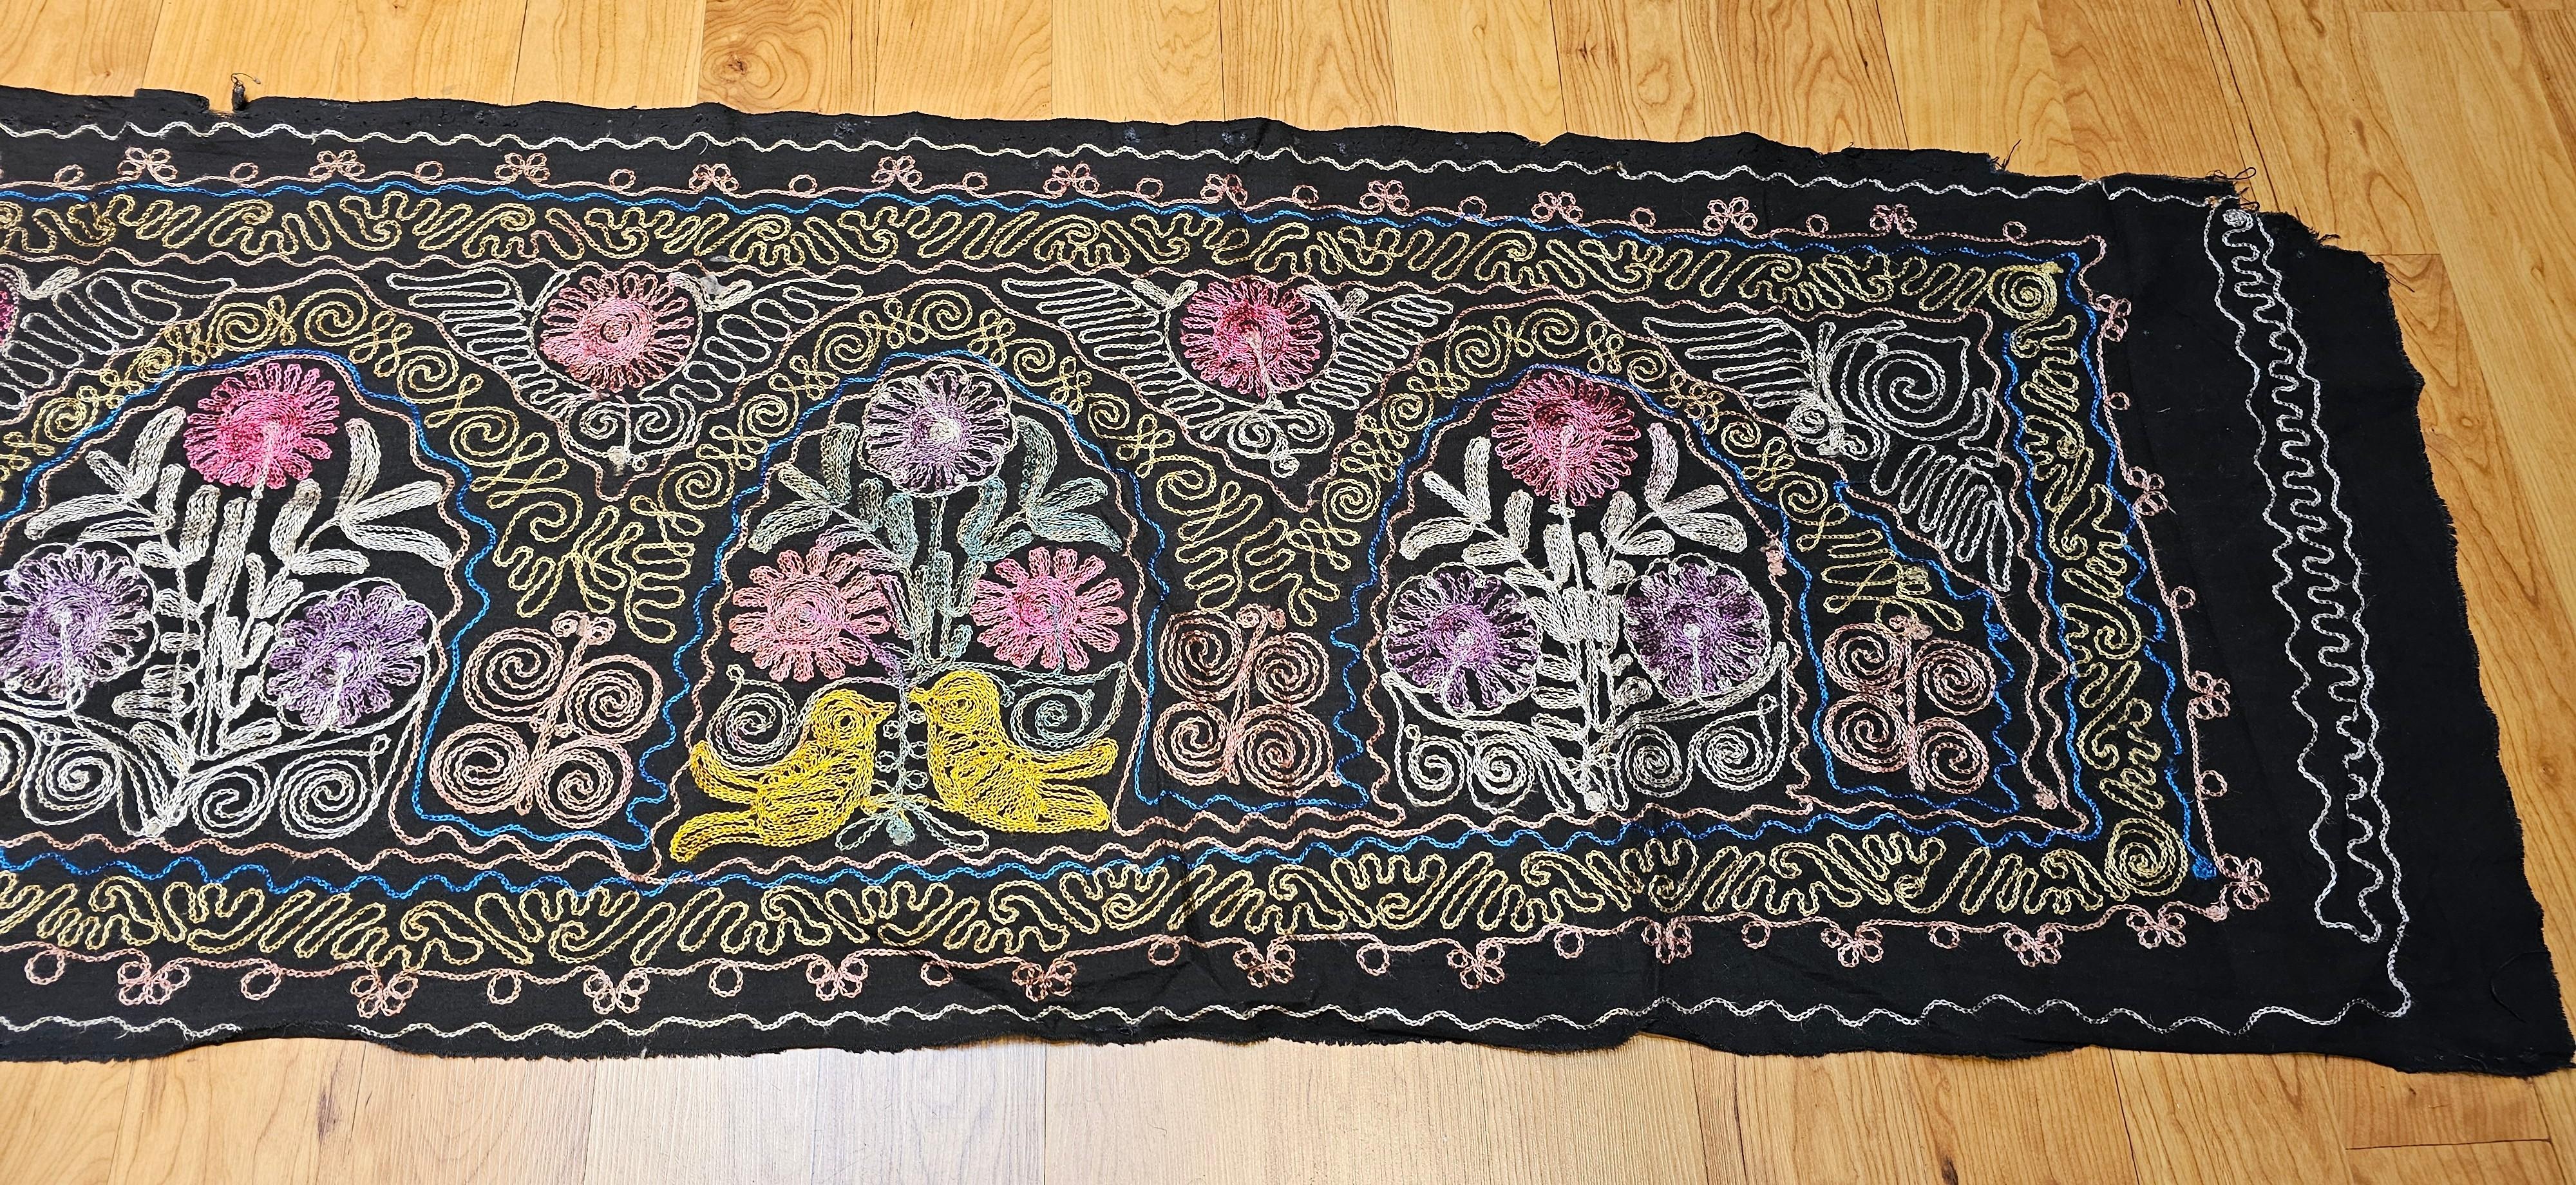 Cotton Vintage Uzbek Suzani Silk Embroidery in Black, Blue, Purple, Yellow, Red For Sale